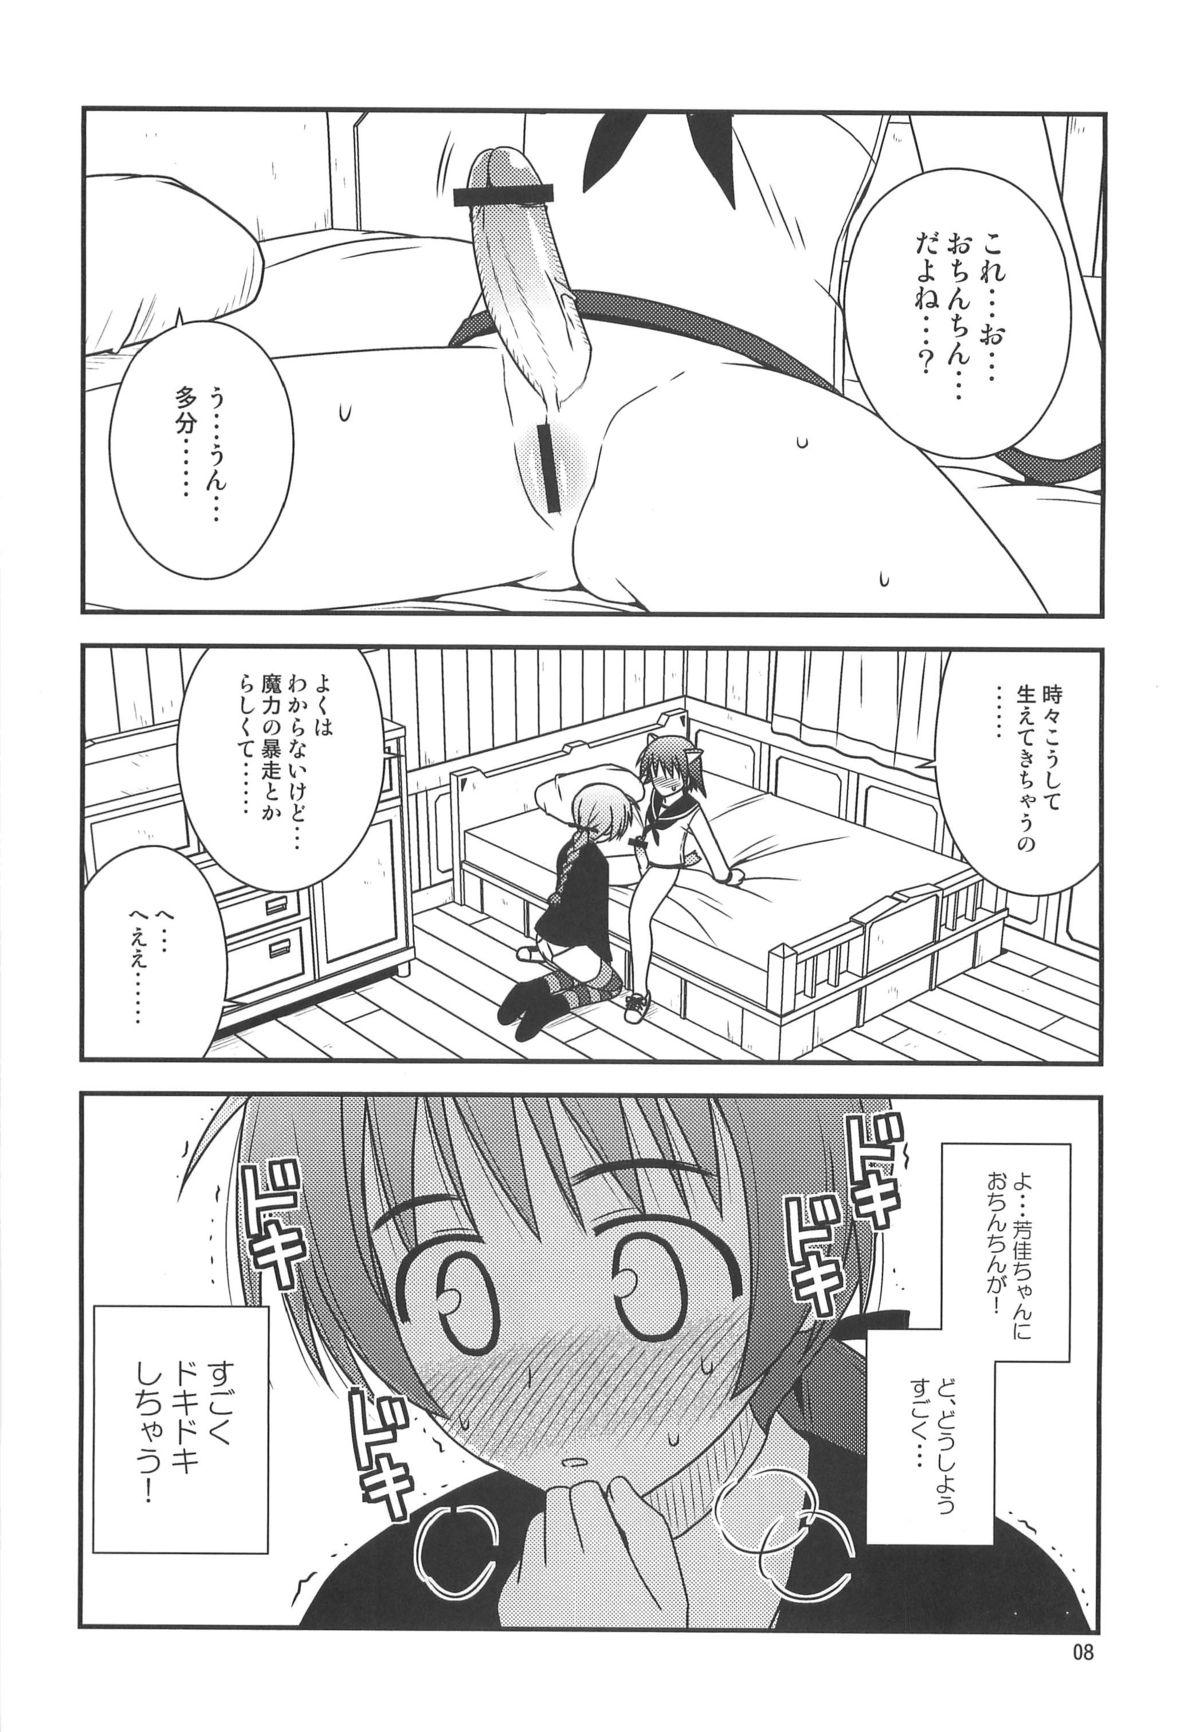 Bbc Witches Rhapsody - Strike witches Party - Page 7